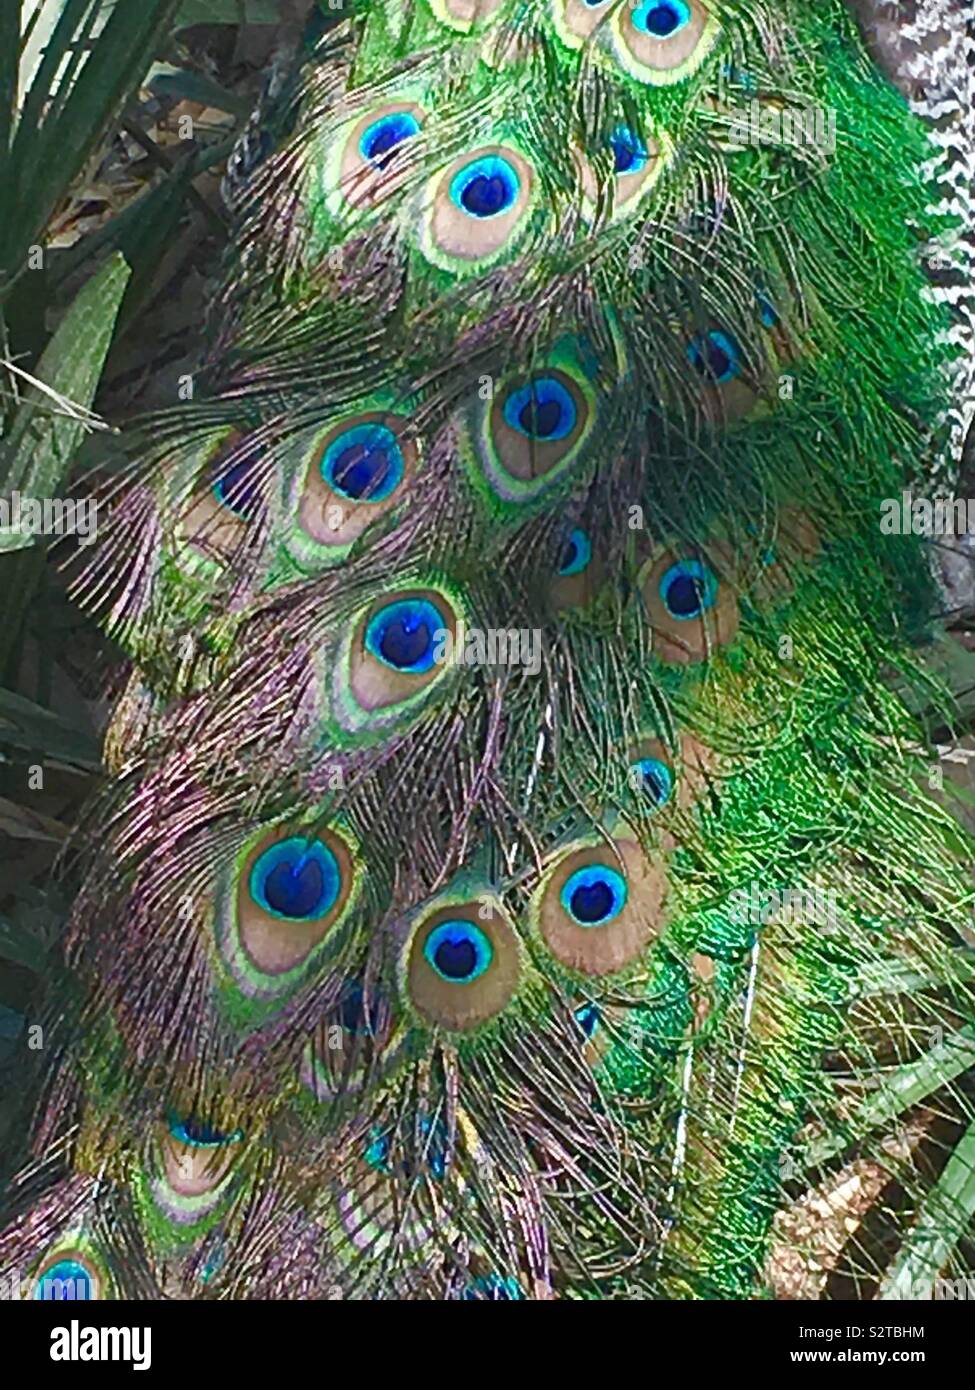 A close up of a peacock’s tail feathers Stock Photo